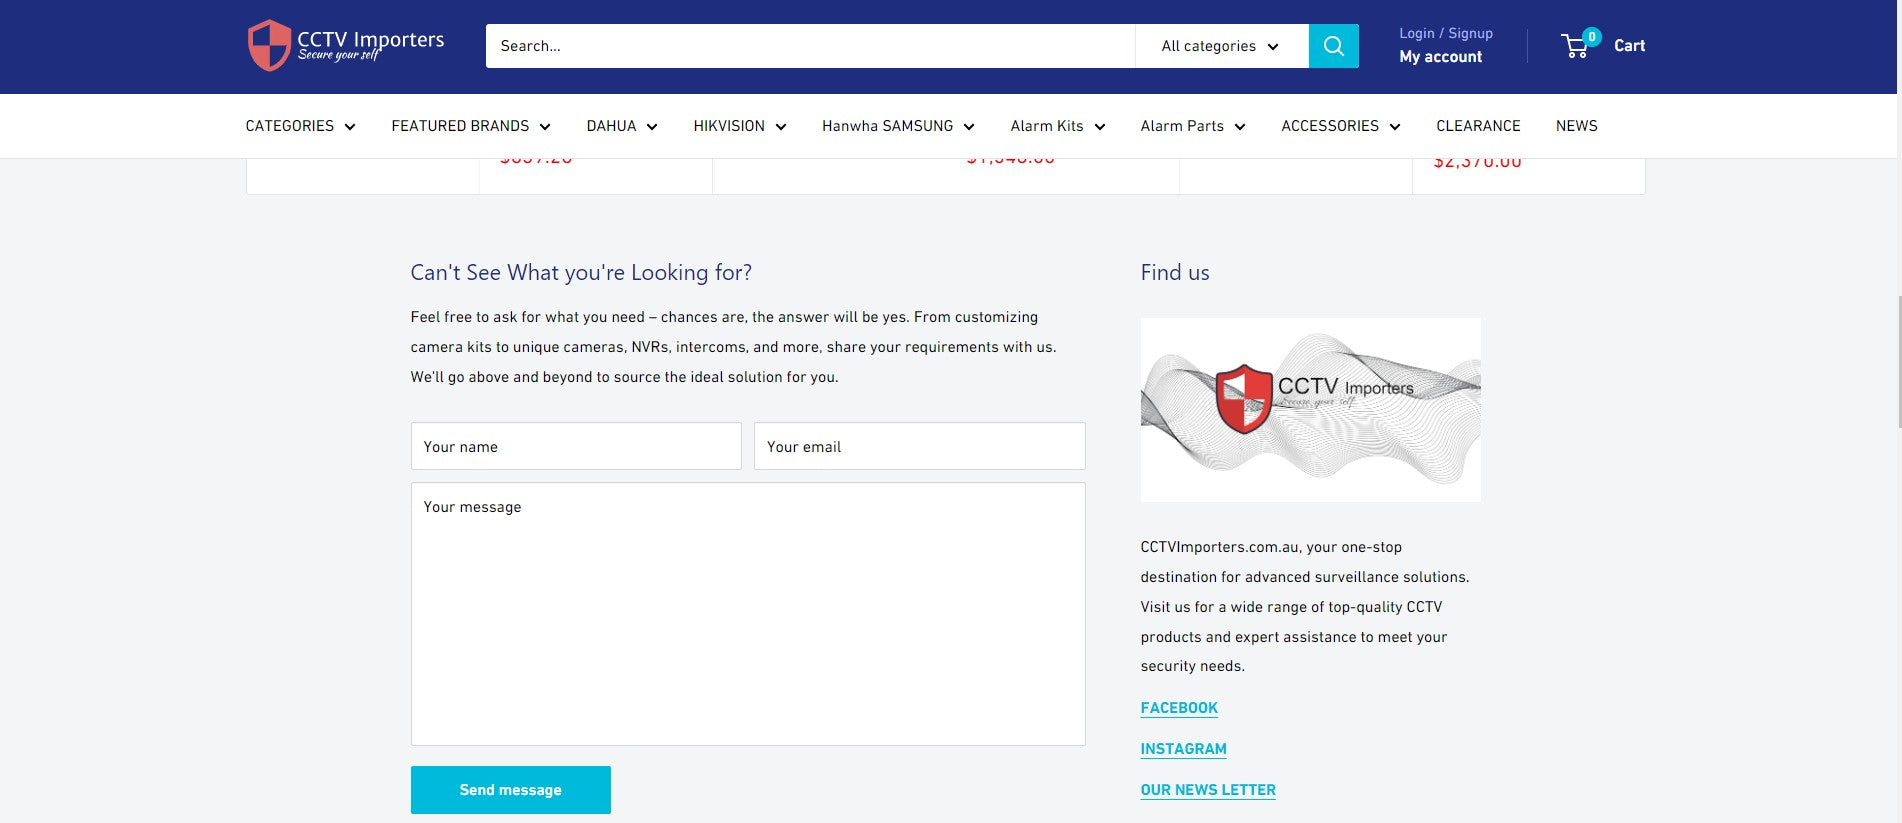 Customizing Your Security: A New Feature at CCTVImporters.com.au